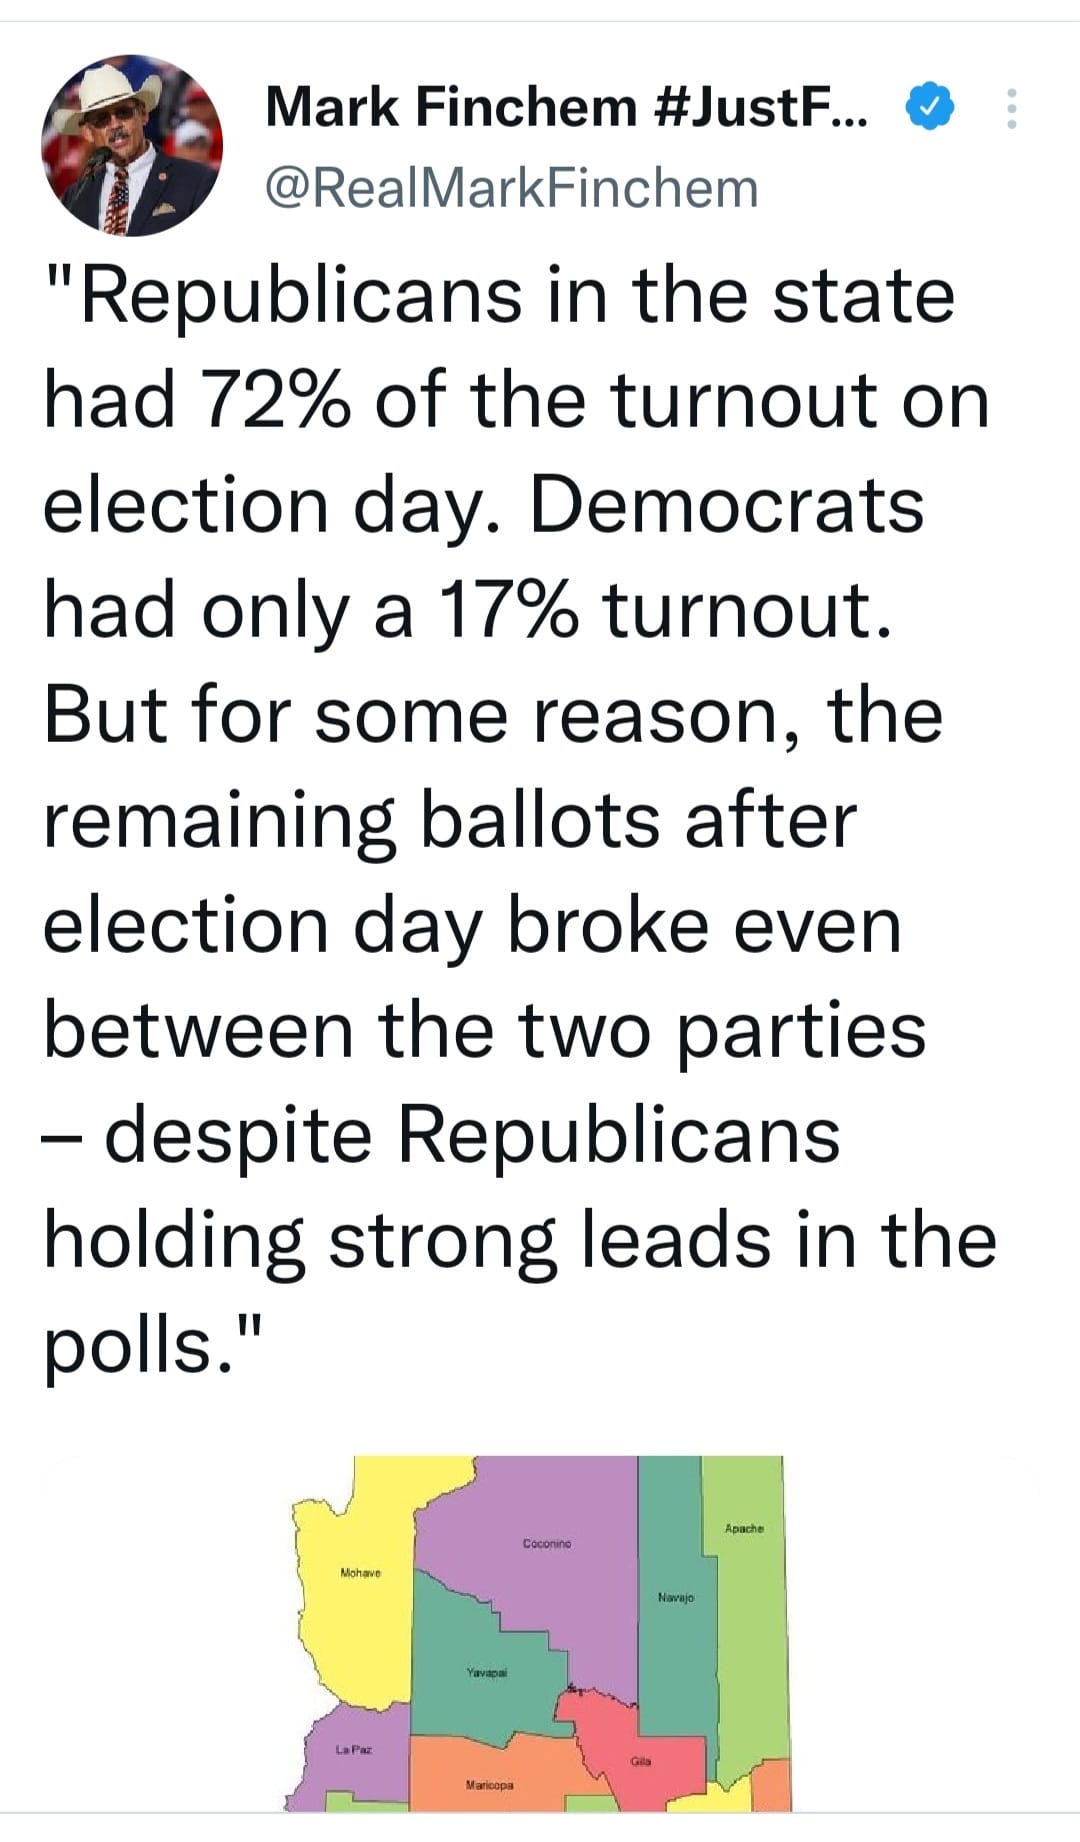 May be an image of text that says 'Mark Finchem #JustF... @RealMarkFinchem "Republicans in the state had 72% of the turnout on election day. Democrats had only a 17% turnout. But for some reason, the remaining ballots after election day broke even between the two parties -despite Republicans holding strong leads in the polls."'